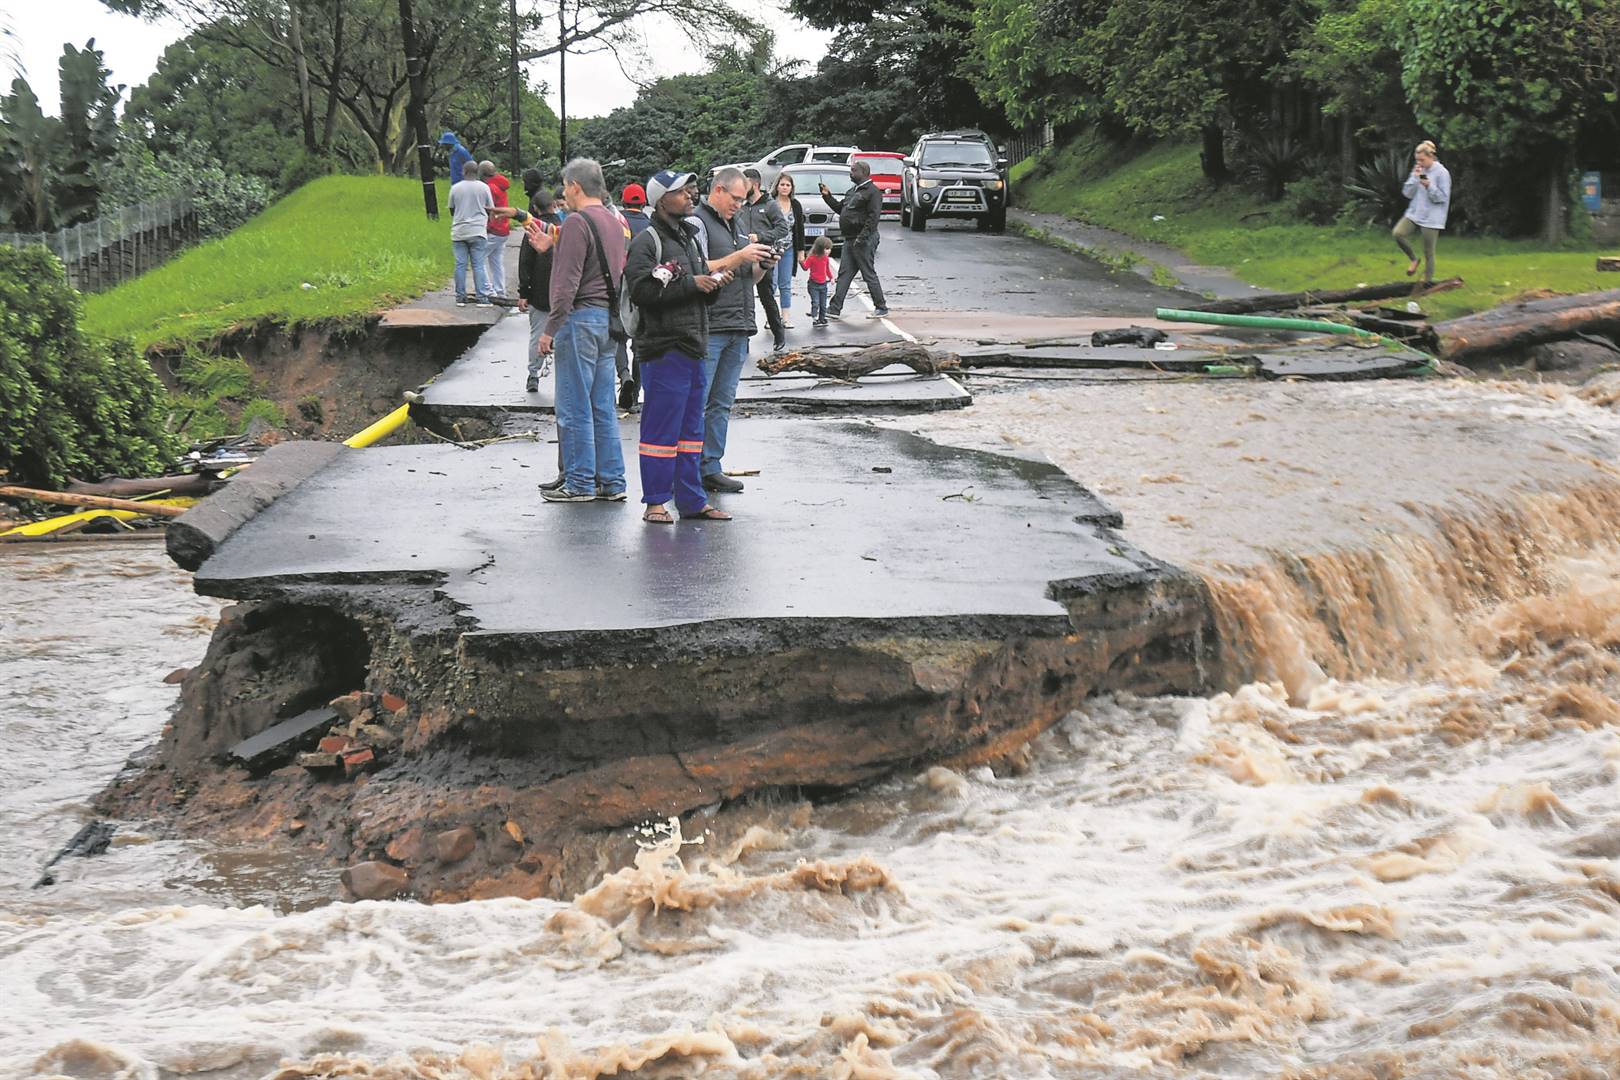 DURBAN, SOUTH AFRICA - APRIL 12: Persistent heavy rain in parts of KZN has resulted in widespread flooding, damaging roads and homes. Part of Caversham Road in Pinetown, KZN, was also washed away by floods yesterday. . on April 12, 2022 in Durban, South Africa.                  Photo by Gallo Images/Darren Stewart